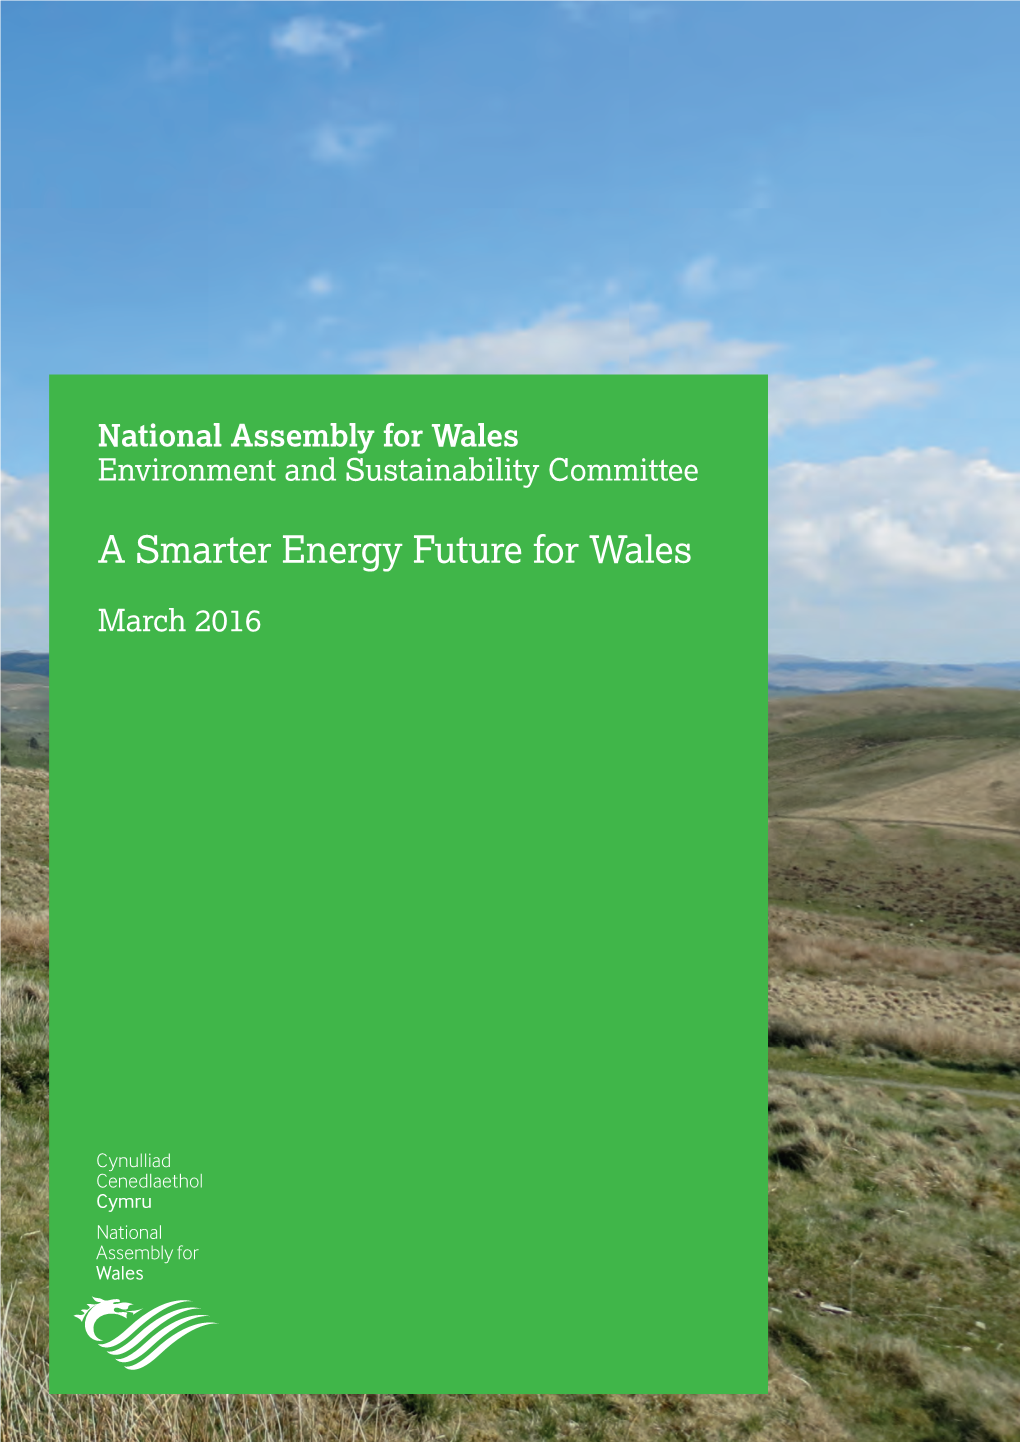 A Smarter Energy Future for Wales